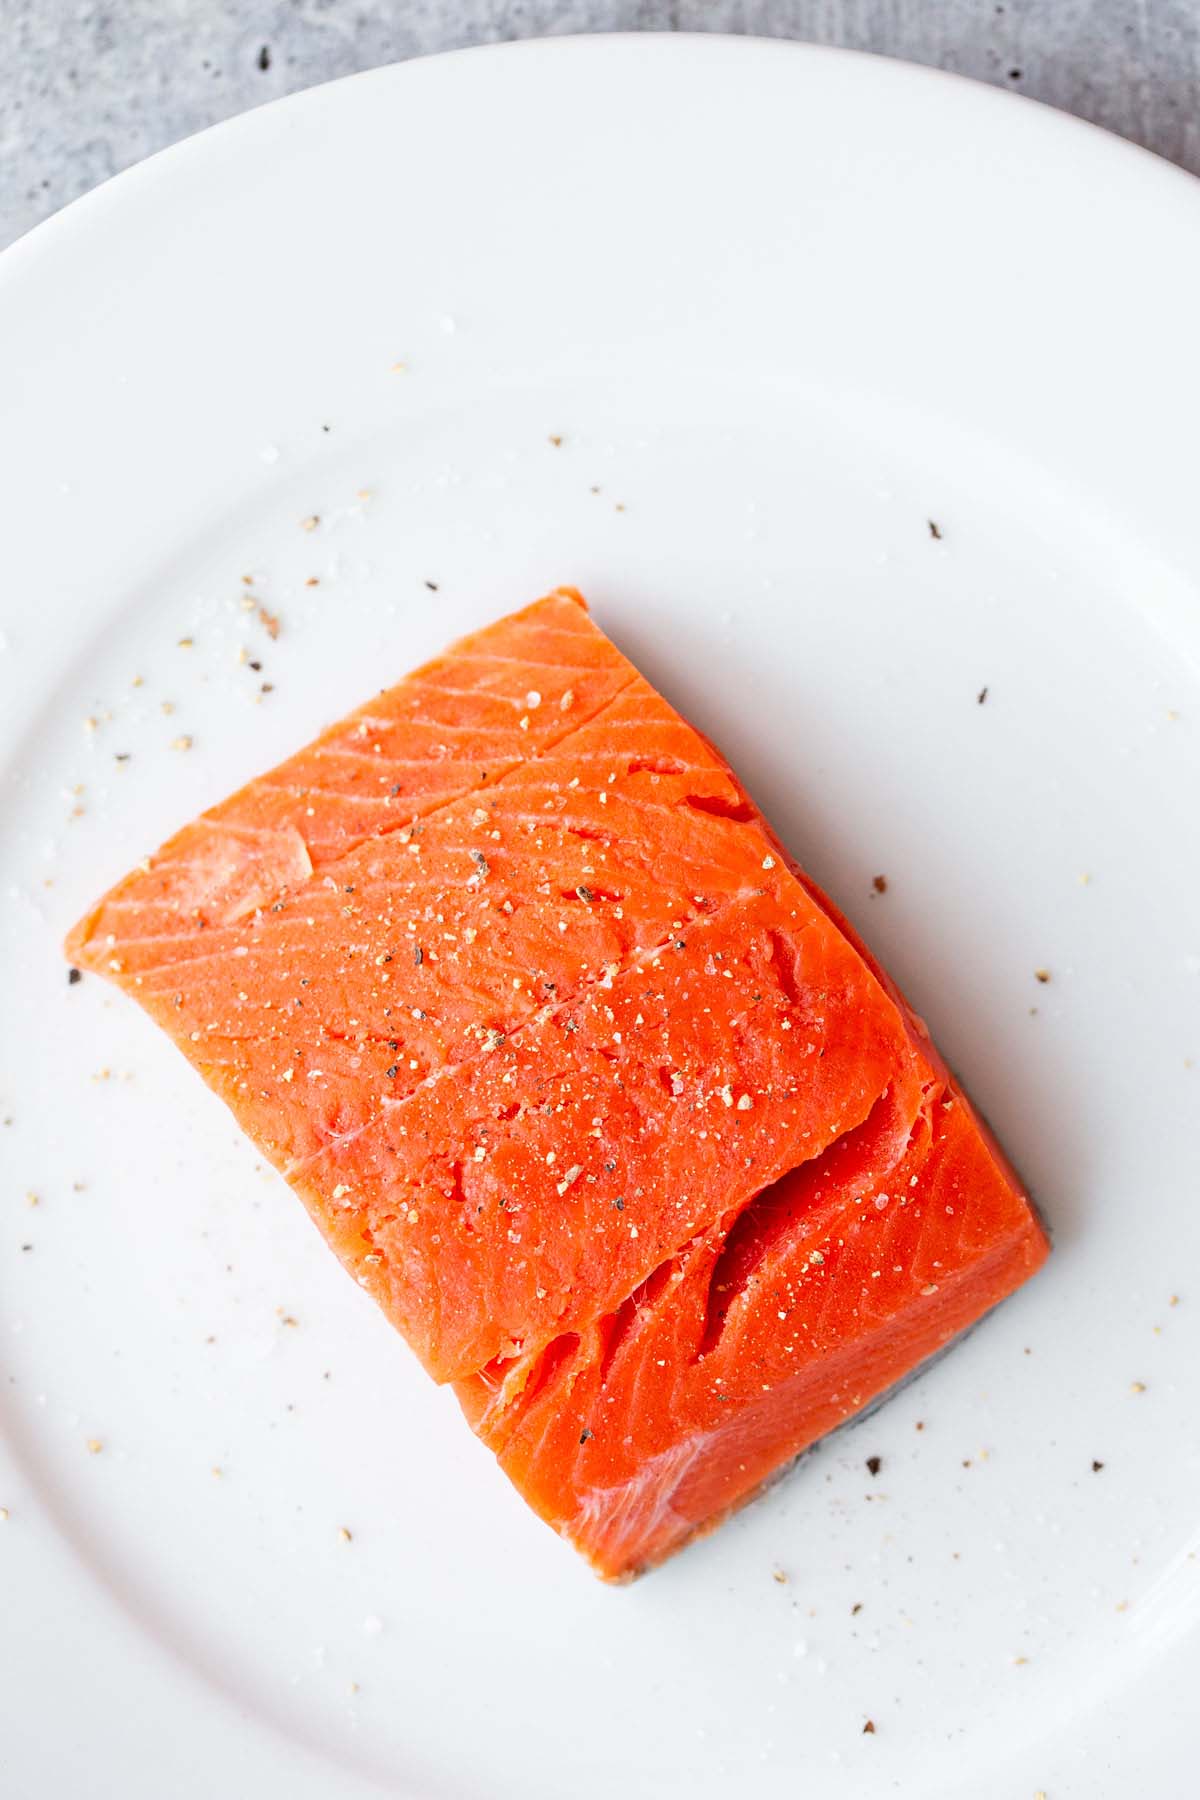 Uncooked salmon on a plate.